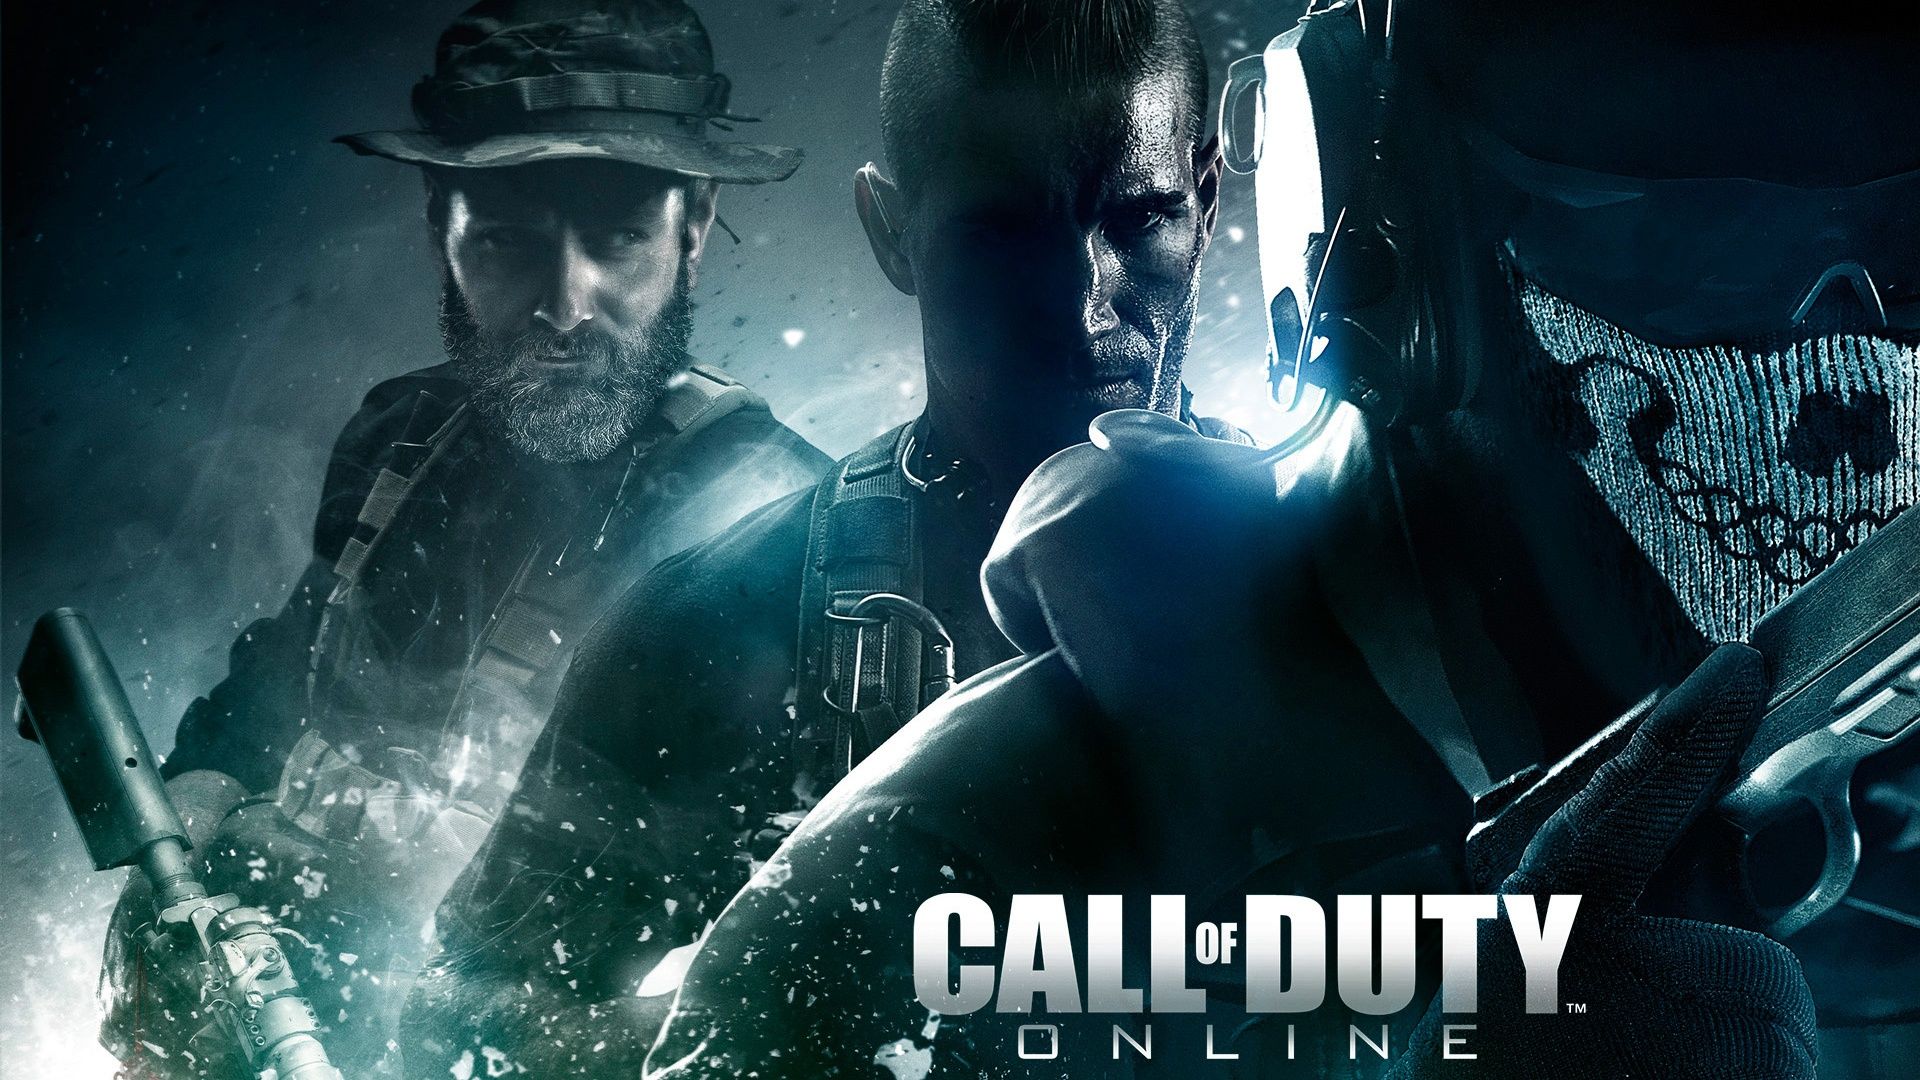 Call of Duty Online Game Wallpaper in jpg format for free download